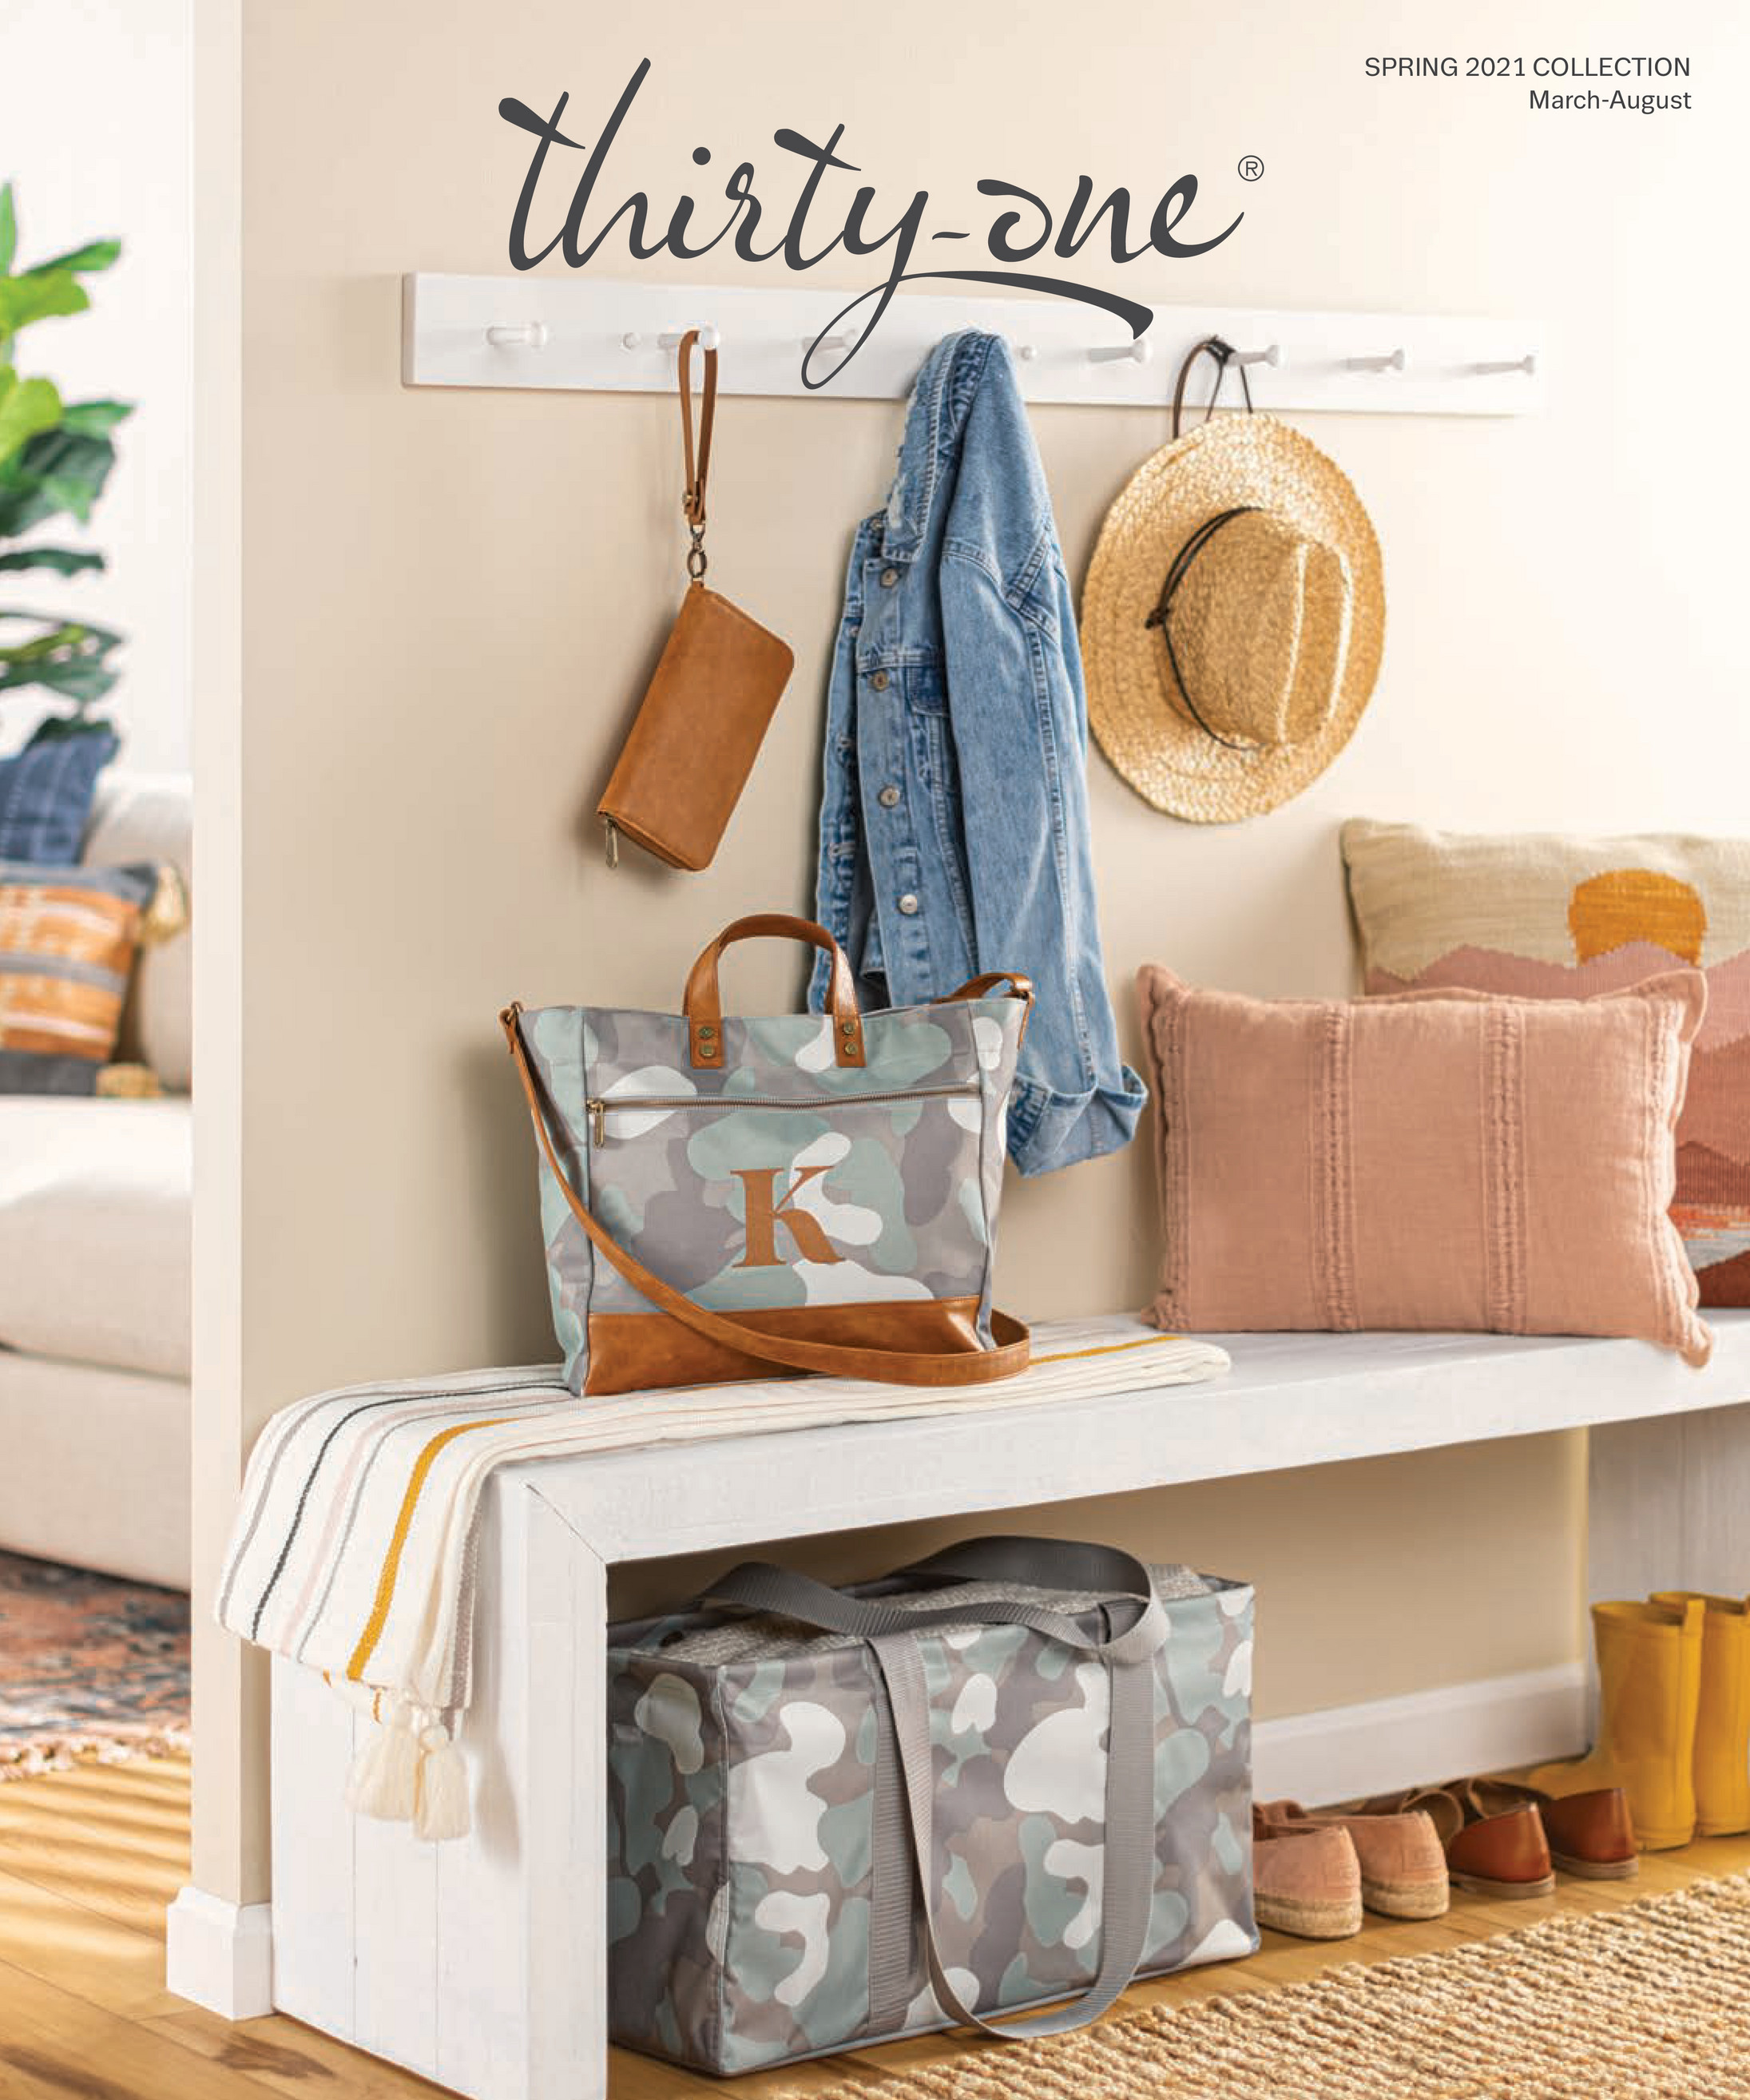 Thirty-one Gifts - Thirty-One Spring 2021 Catalog - Page 2-3